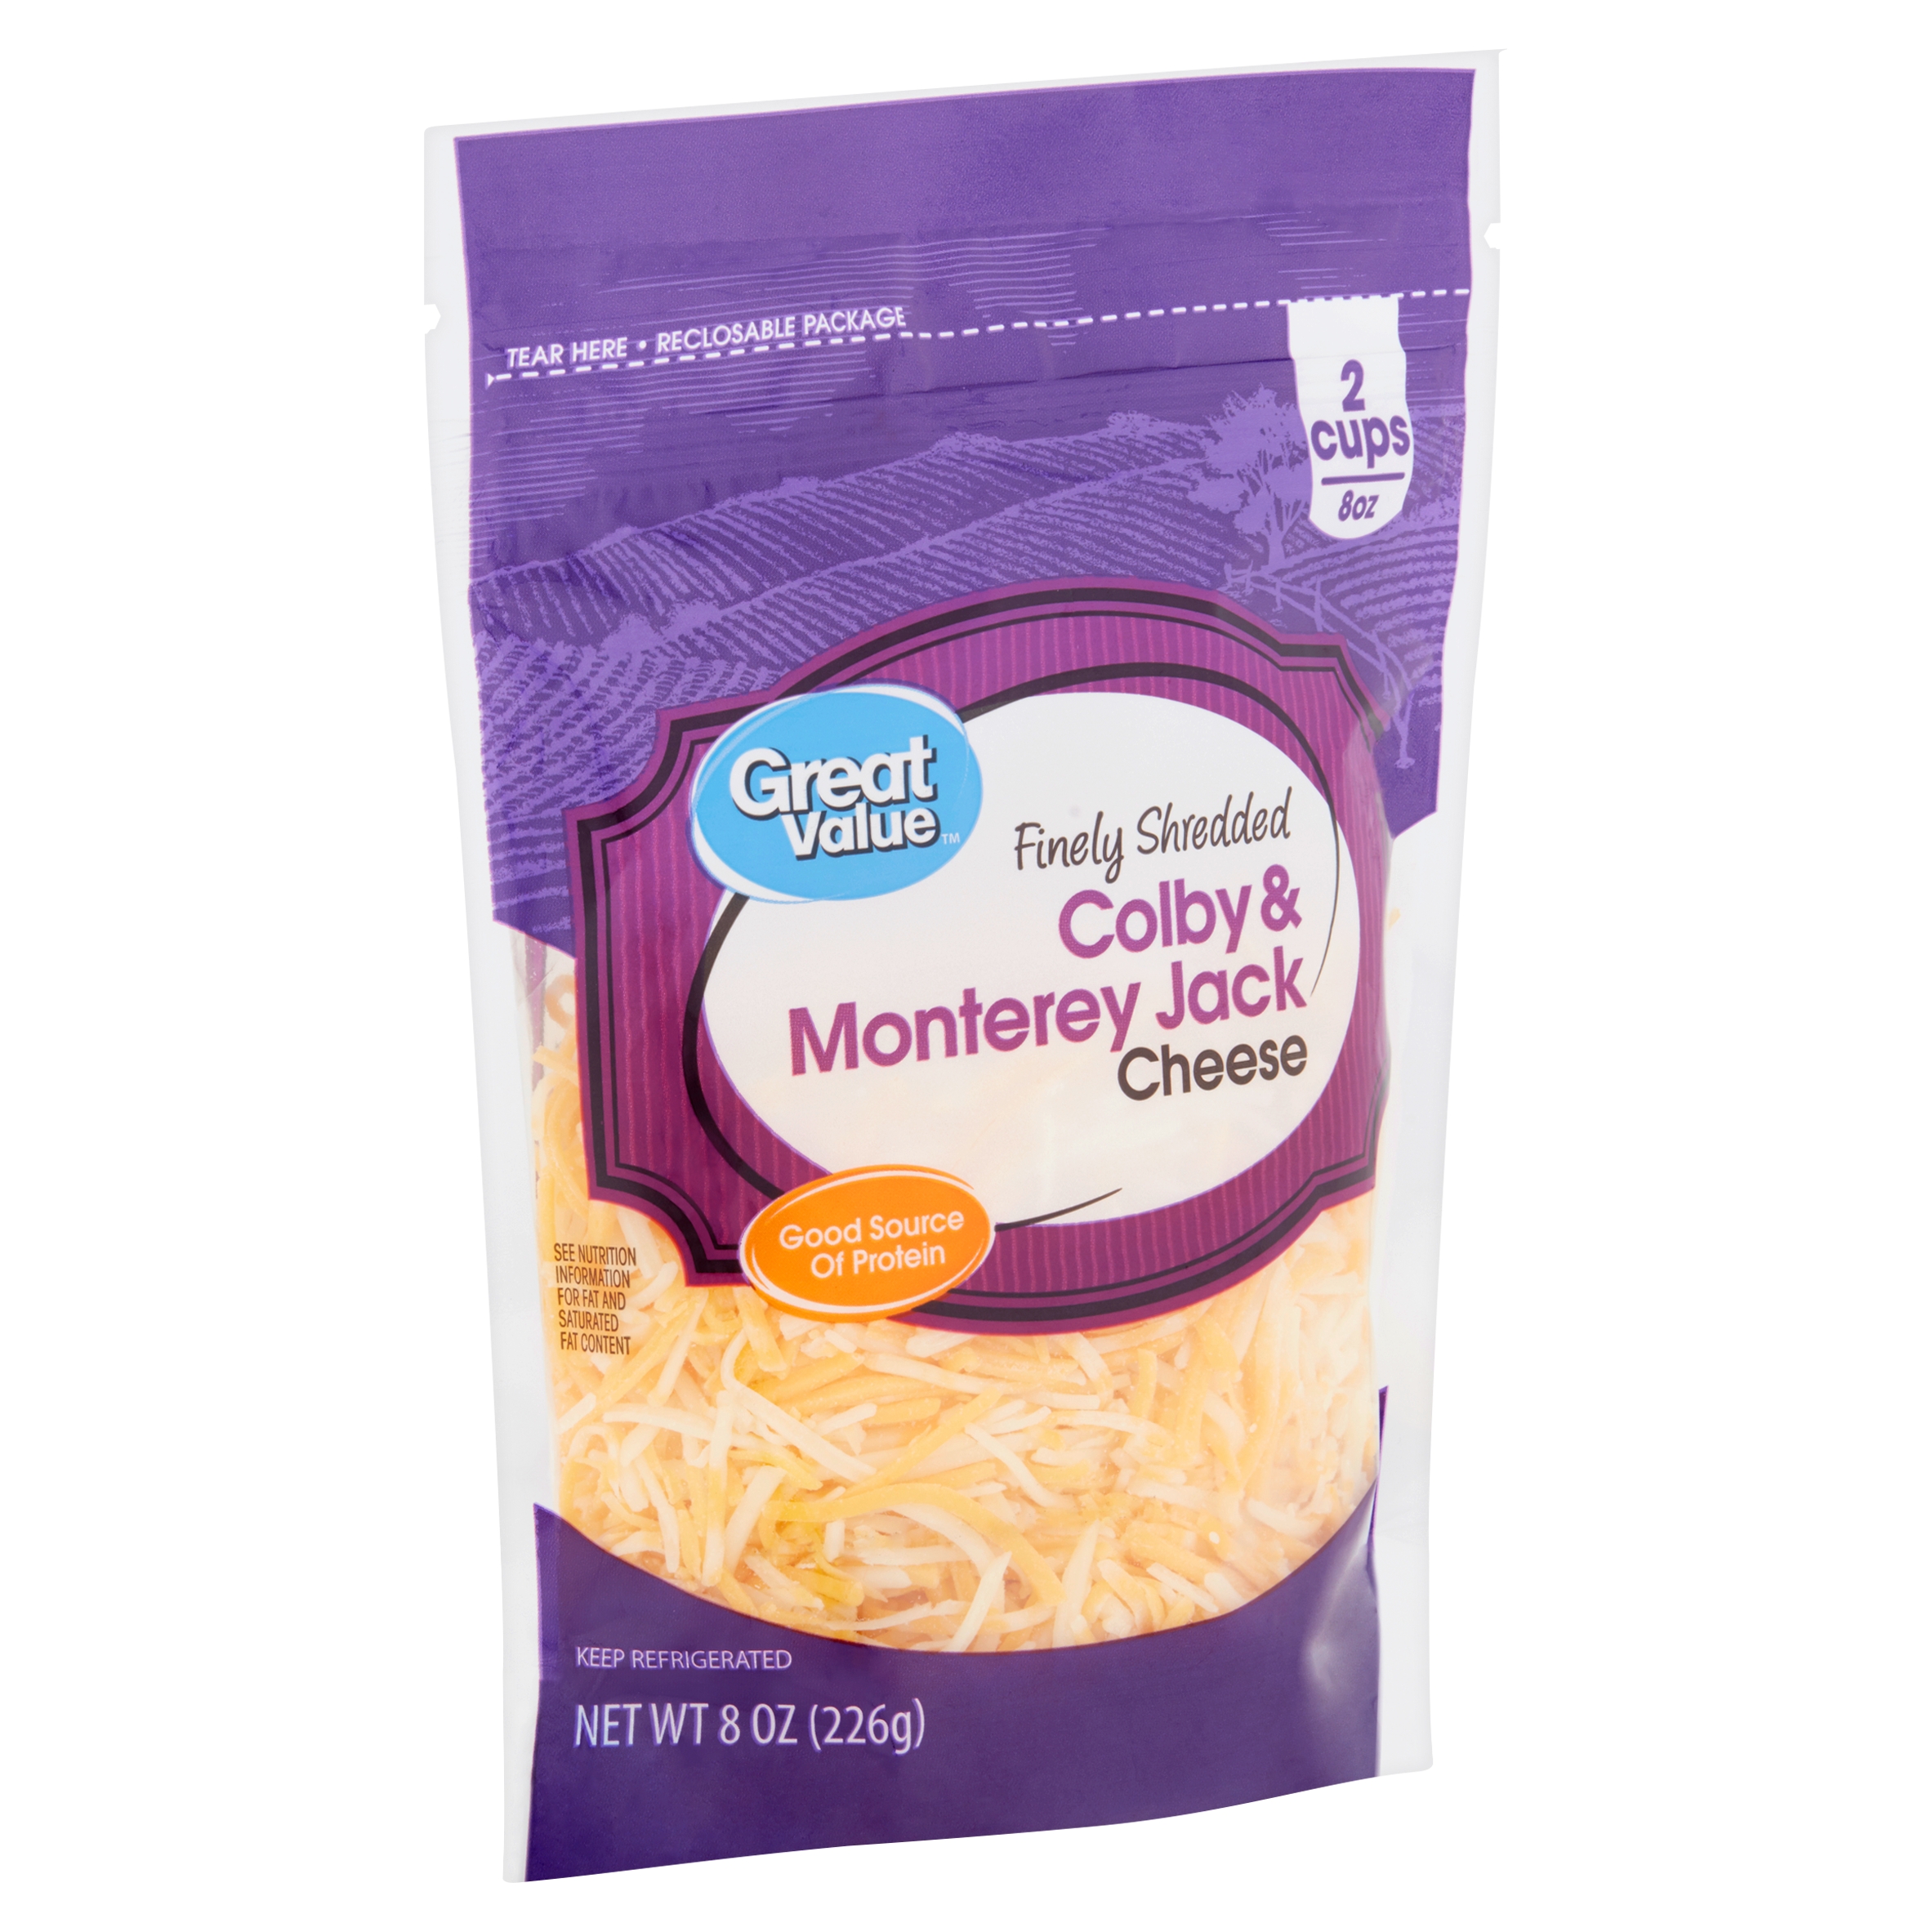 Great Value Finely Shredded Colby & Monterey Jack Cheese, 8 Oz Image